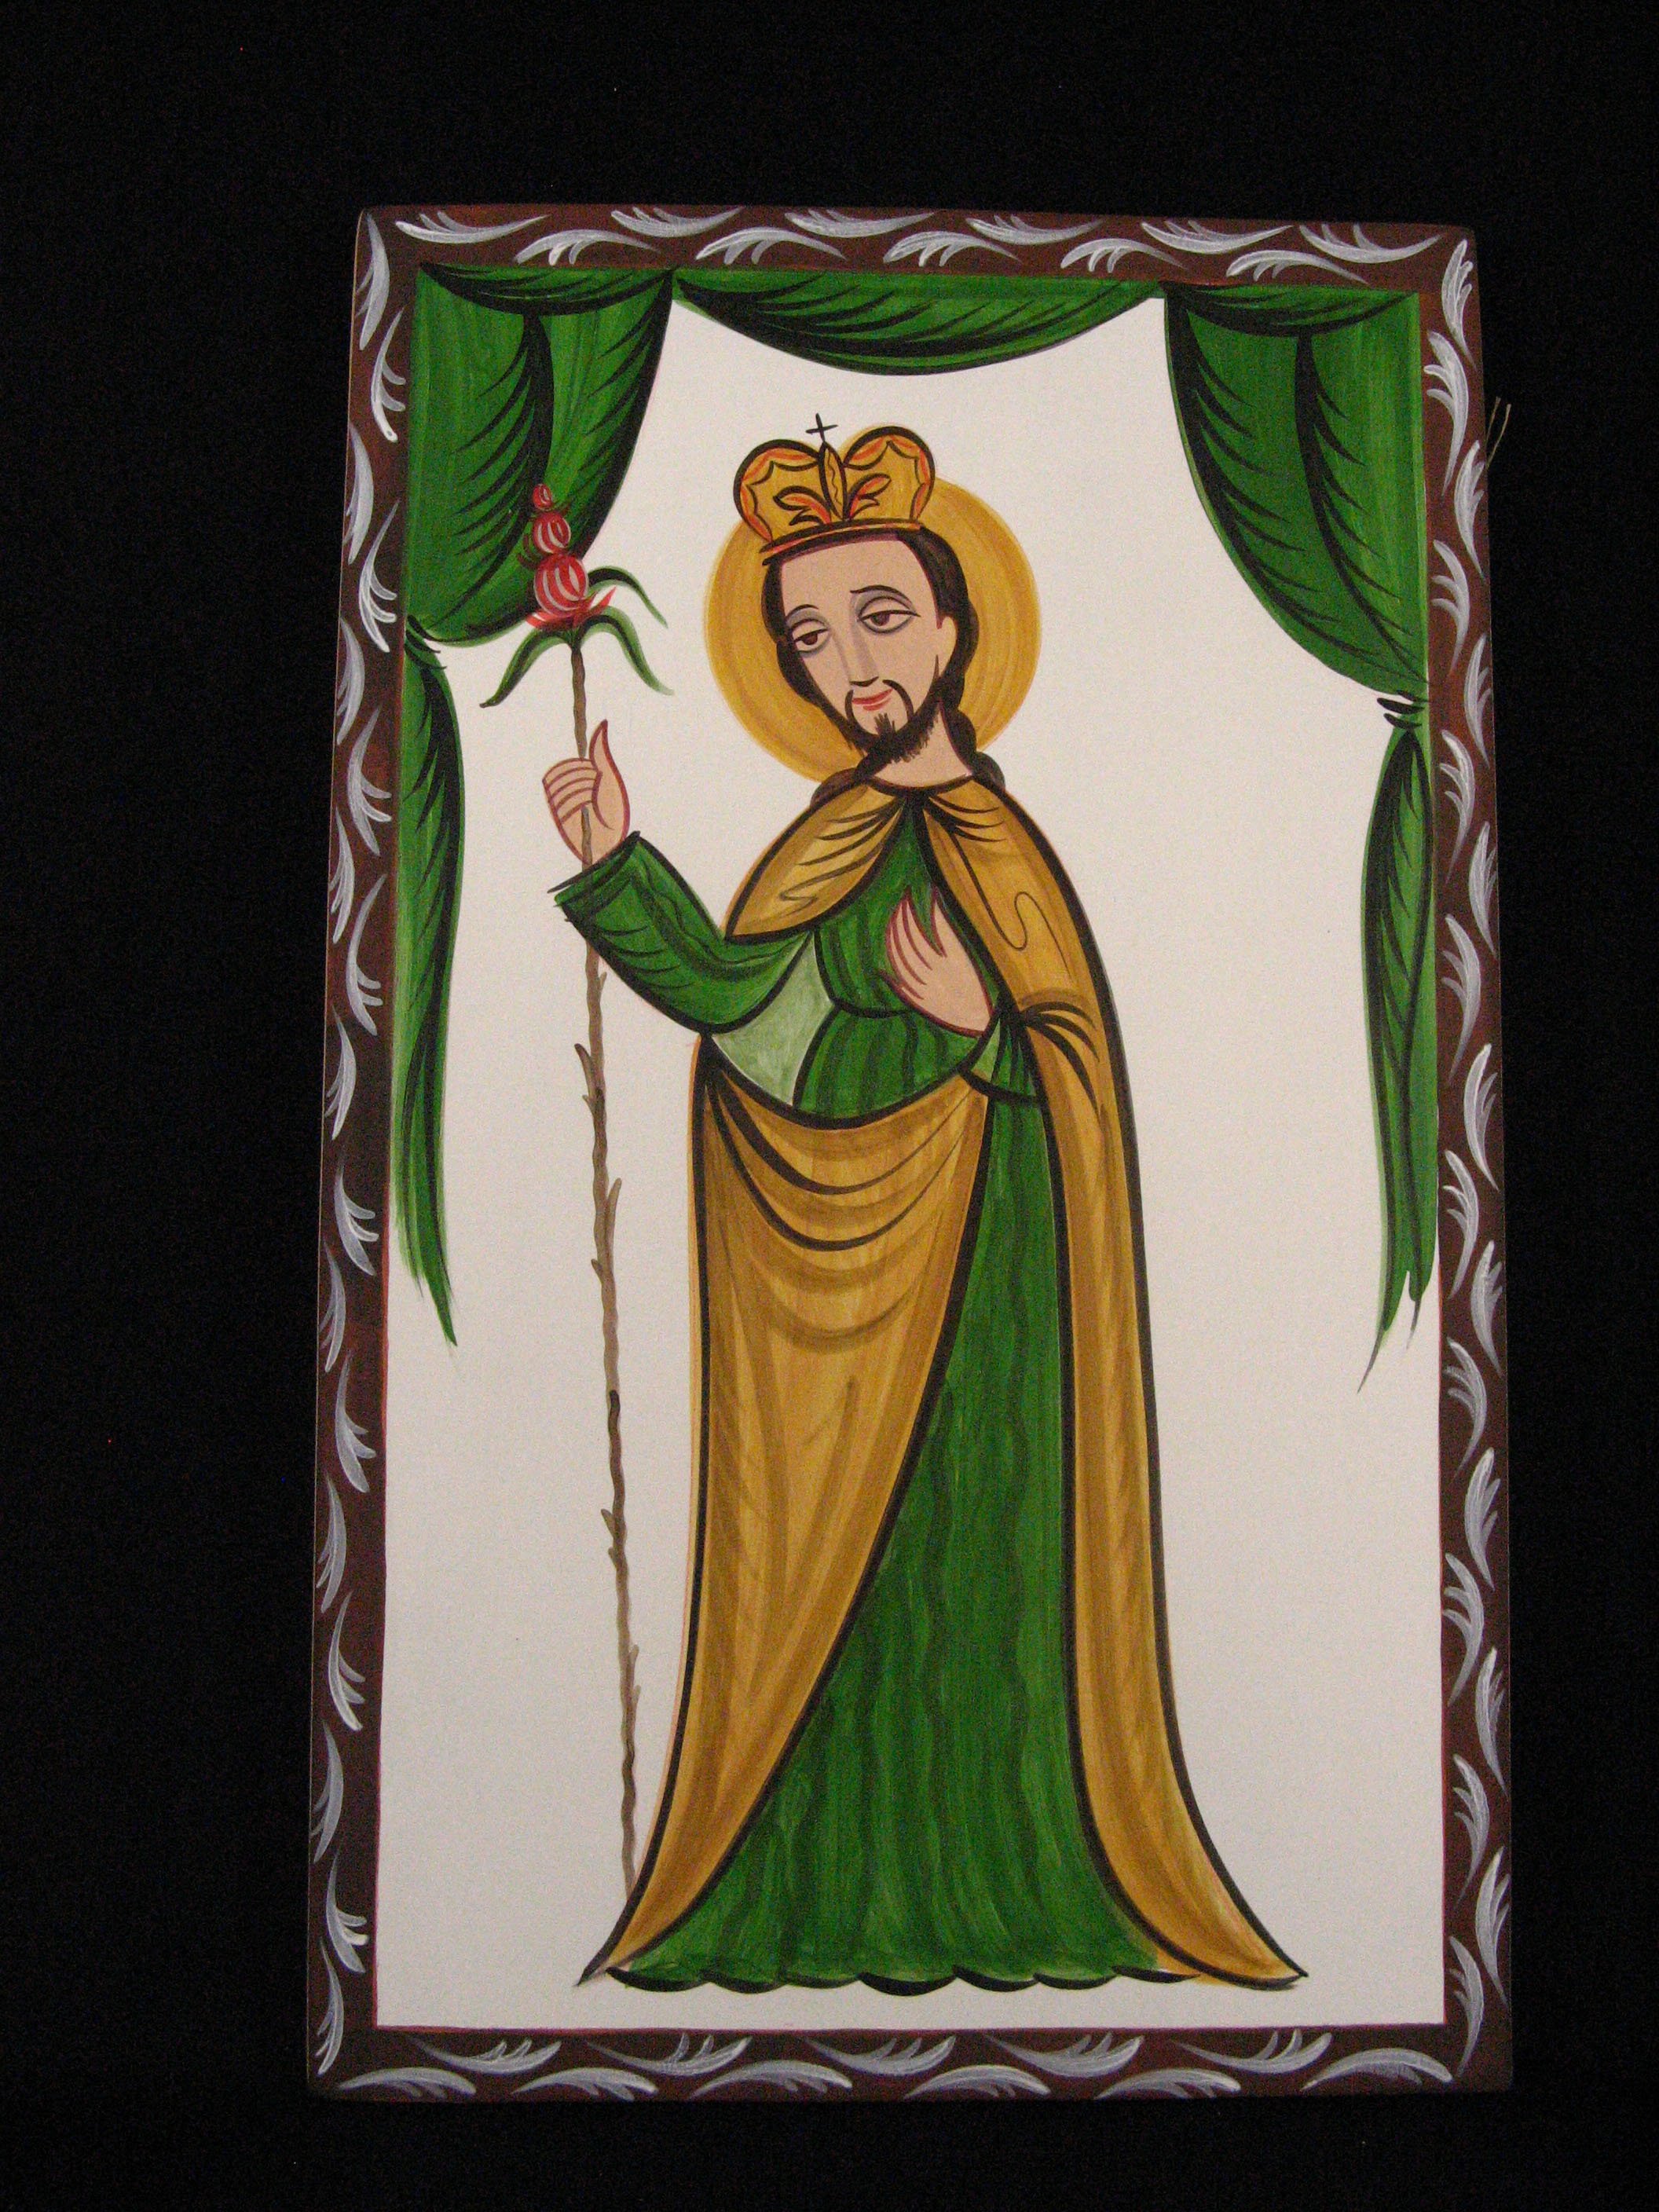 Saint Joseph standing and holding his staff. South American style with bold greens and mustard yellow as dominant colors.